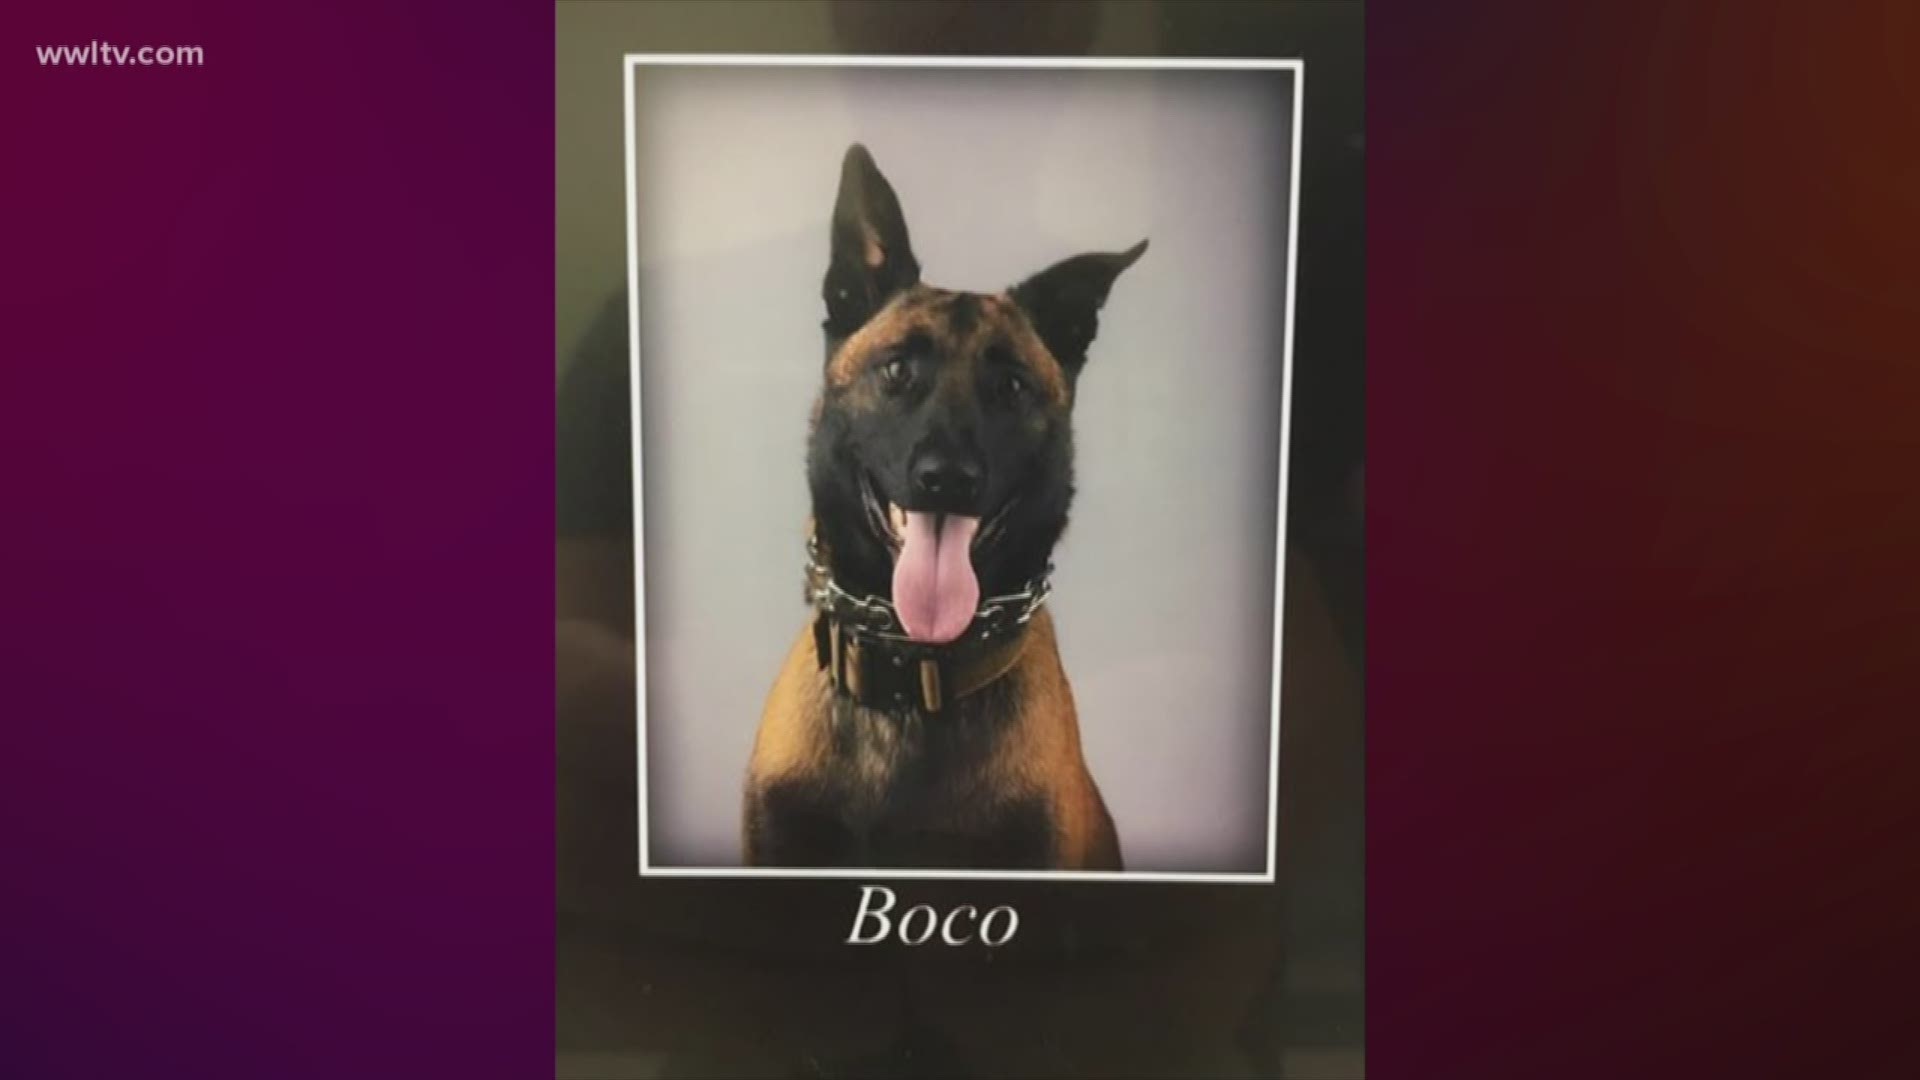 Boco was working to find an attempted murder suspect when deputies said they heard a volley of gunfire.